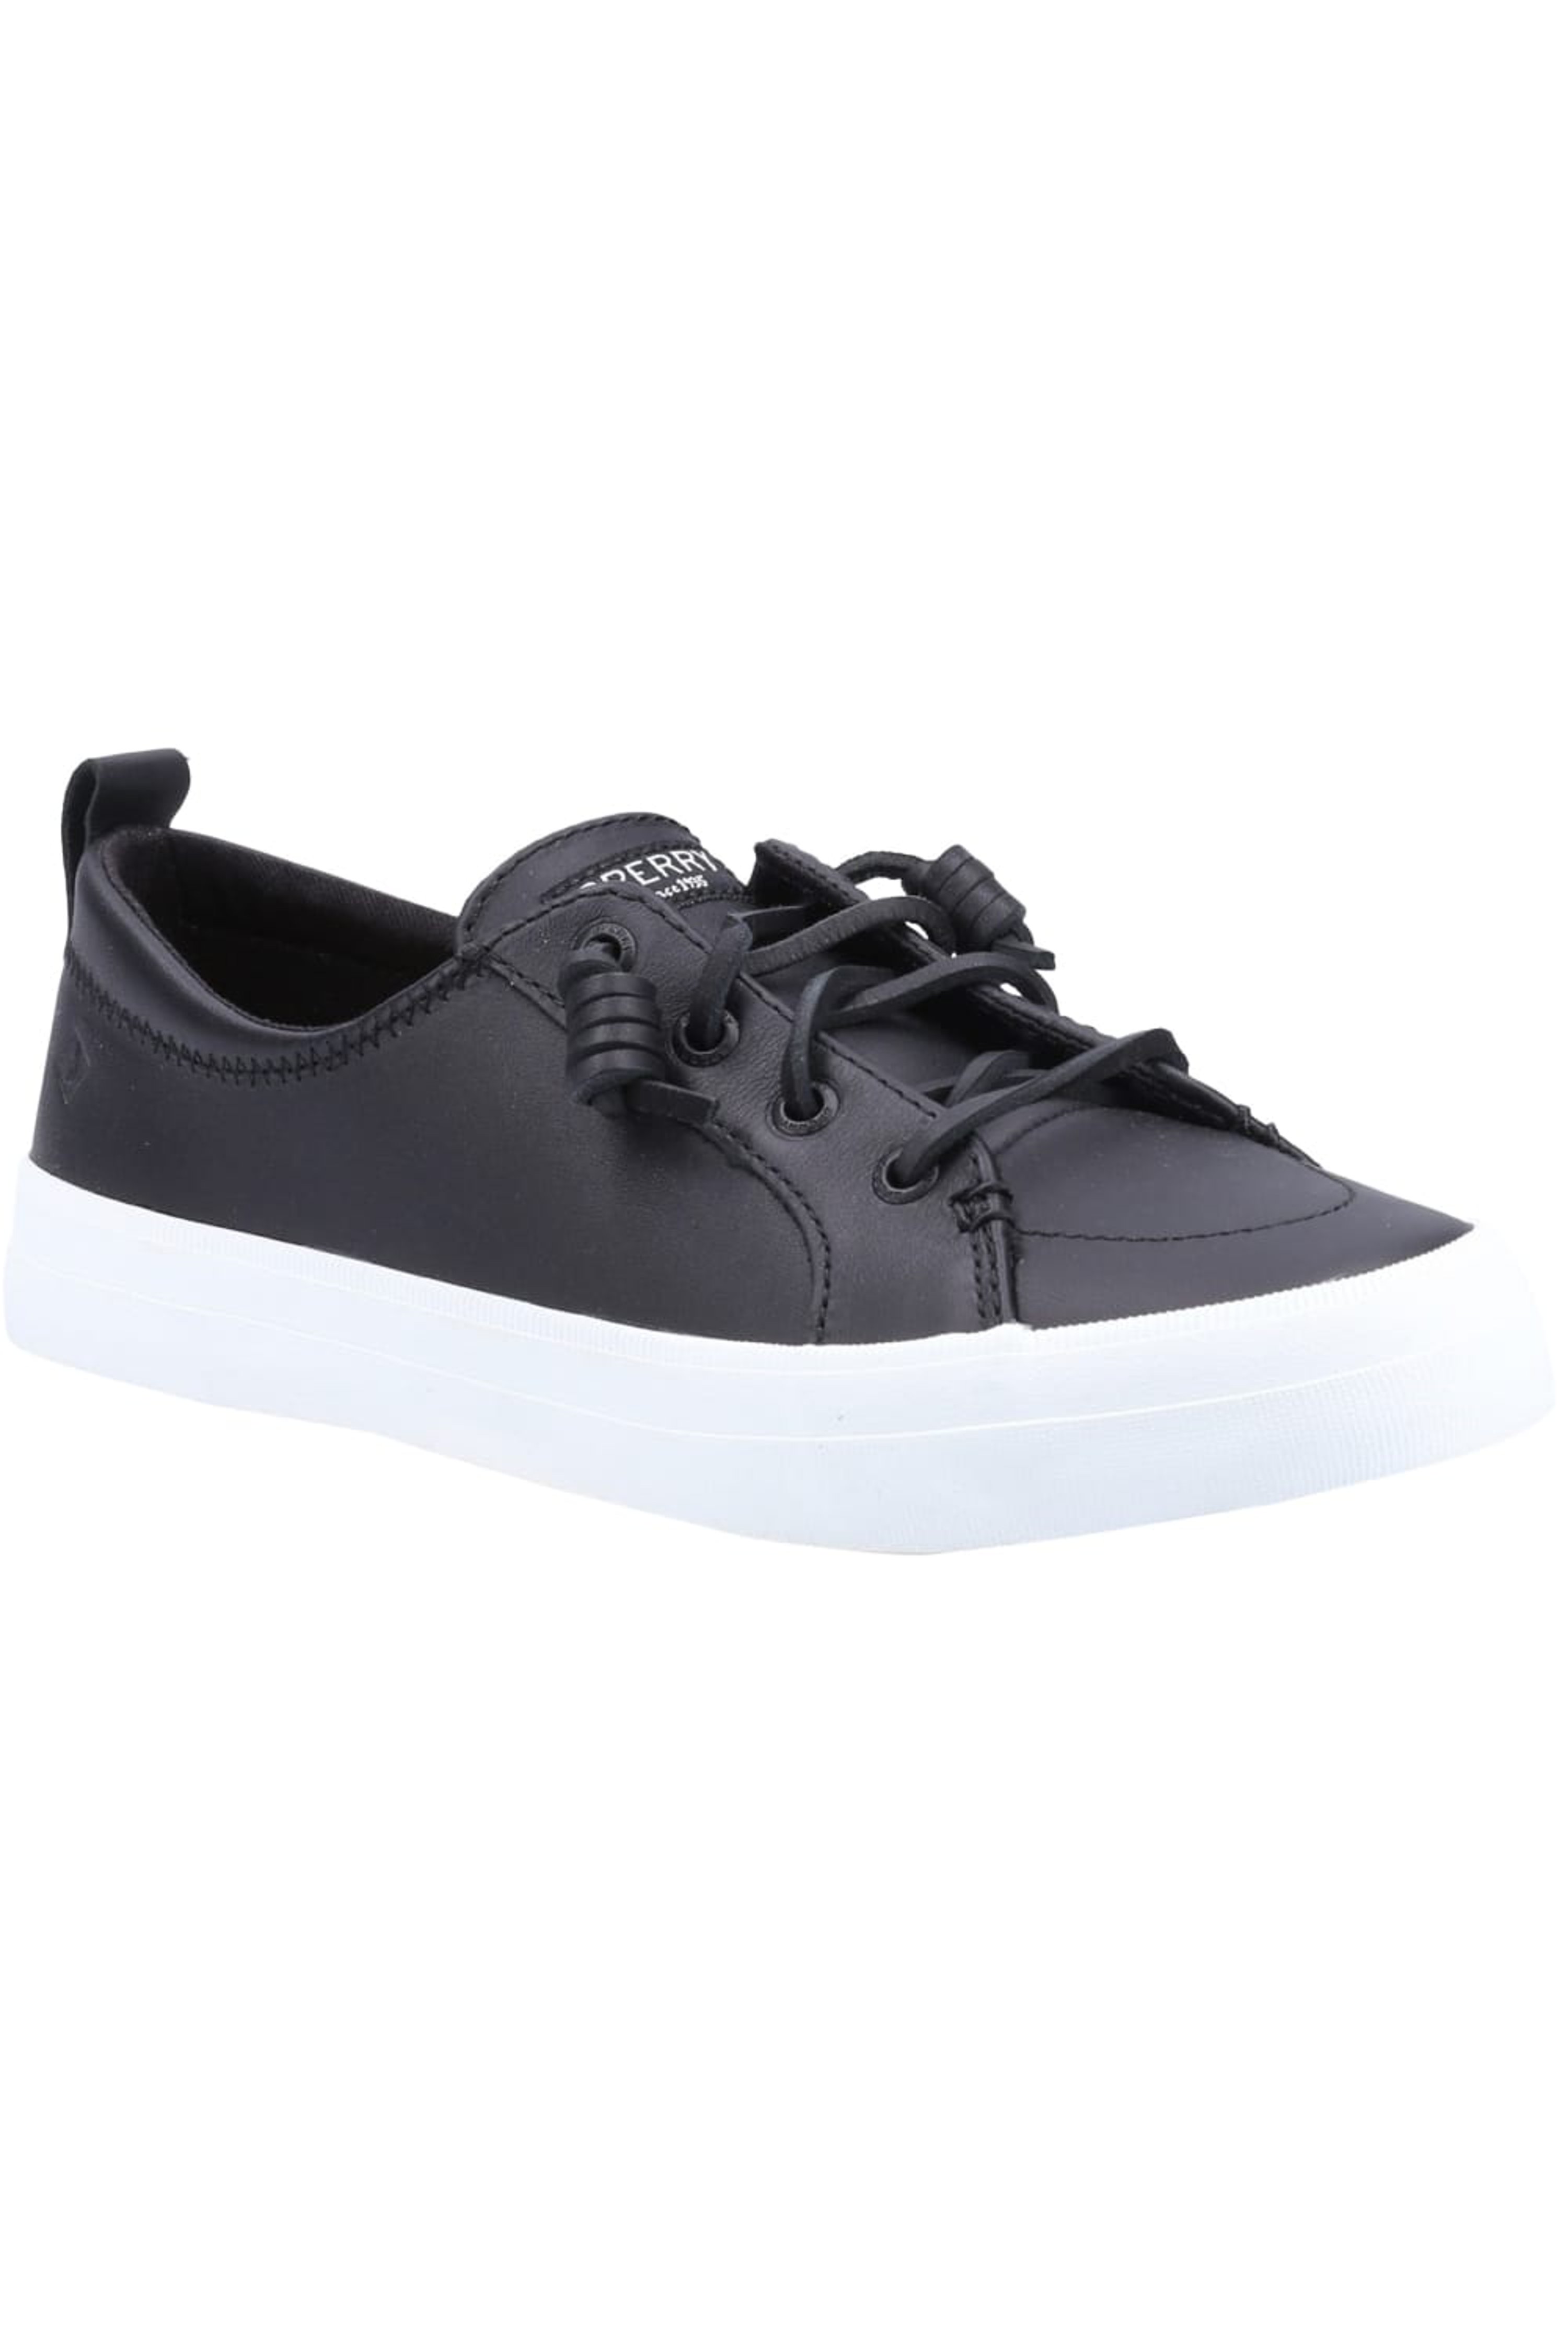 SPERRY SPERRY SPERRY WOMENS/LADIES CREST VIBE LEATHER SNEAKERS (BLACK)